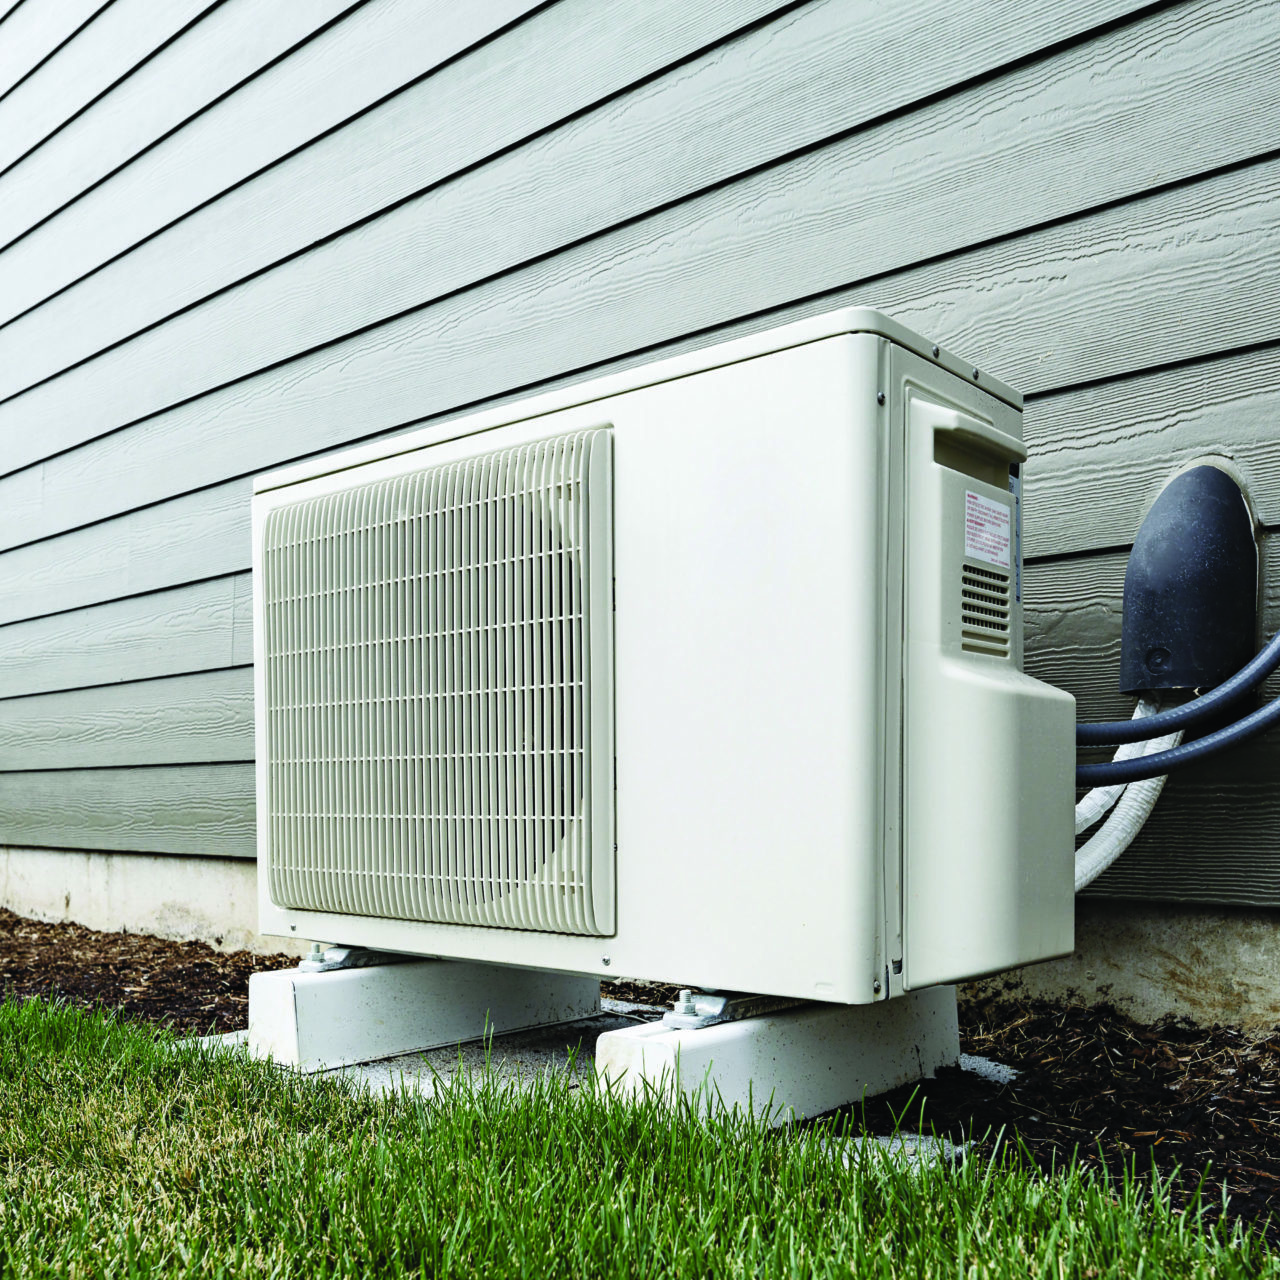 A ductless heat pump outdoor unit. Photo by Lincoln Barbour, courtesy of NEEA.